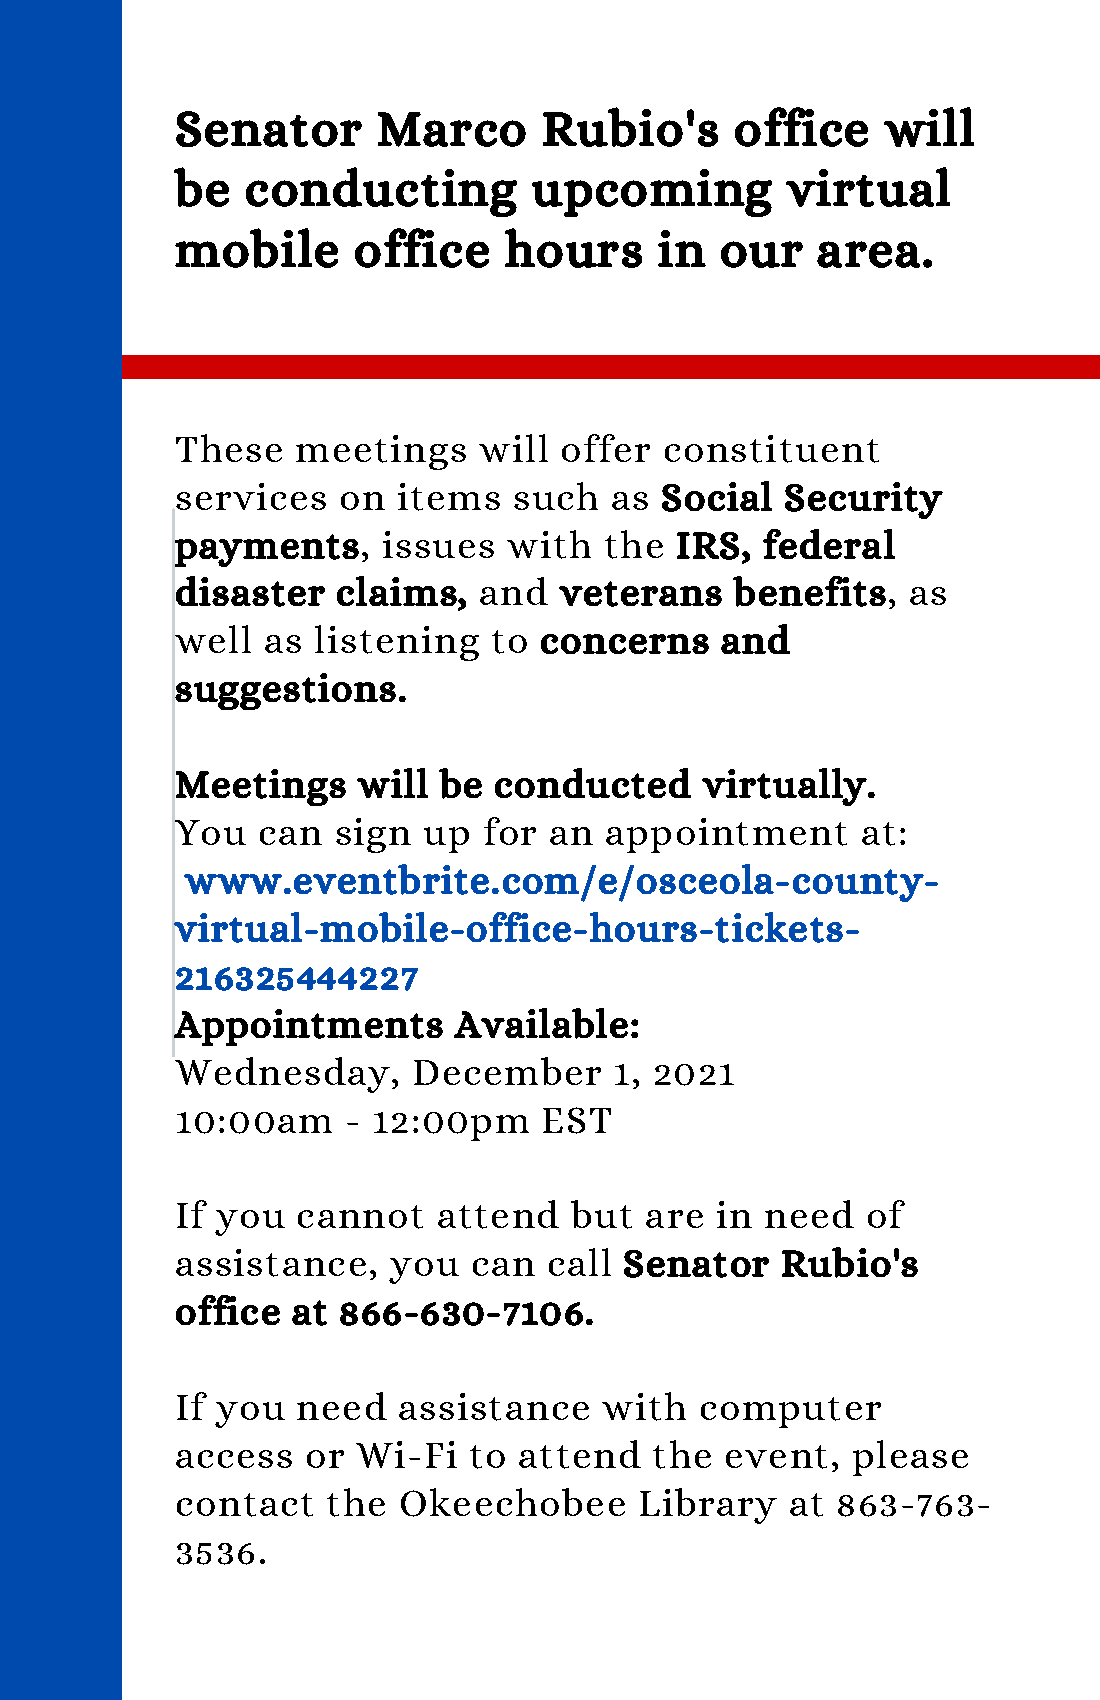 Senator Marco Rubio's office will be conducting upcoming virtual mobile office hours in our area. These meetings will offer constituent services on items such as Social Security payments, issues with the IRS, federal disaster claims, and veterans benefits, as well as listening to concerns and suggestions.  Meetings will be conducted virtually. You can sign up for an appointment at:  www.eventbrite.com/e/osceola-county-virtual-mobile-office-hours-tickets-216325444227 Appointments Available: Wednesday, December 1, 2021, 10:00am - 12:00pm EST  If you cannot attend but are in need of assistance, you can call Senator Rubio's office at 866-630-7106.  If you need assistance with computer access or Wi-Fi to attend the event, please contact the Okeechobee Library at 863-763-3536.